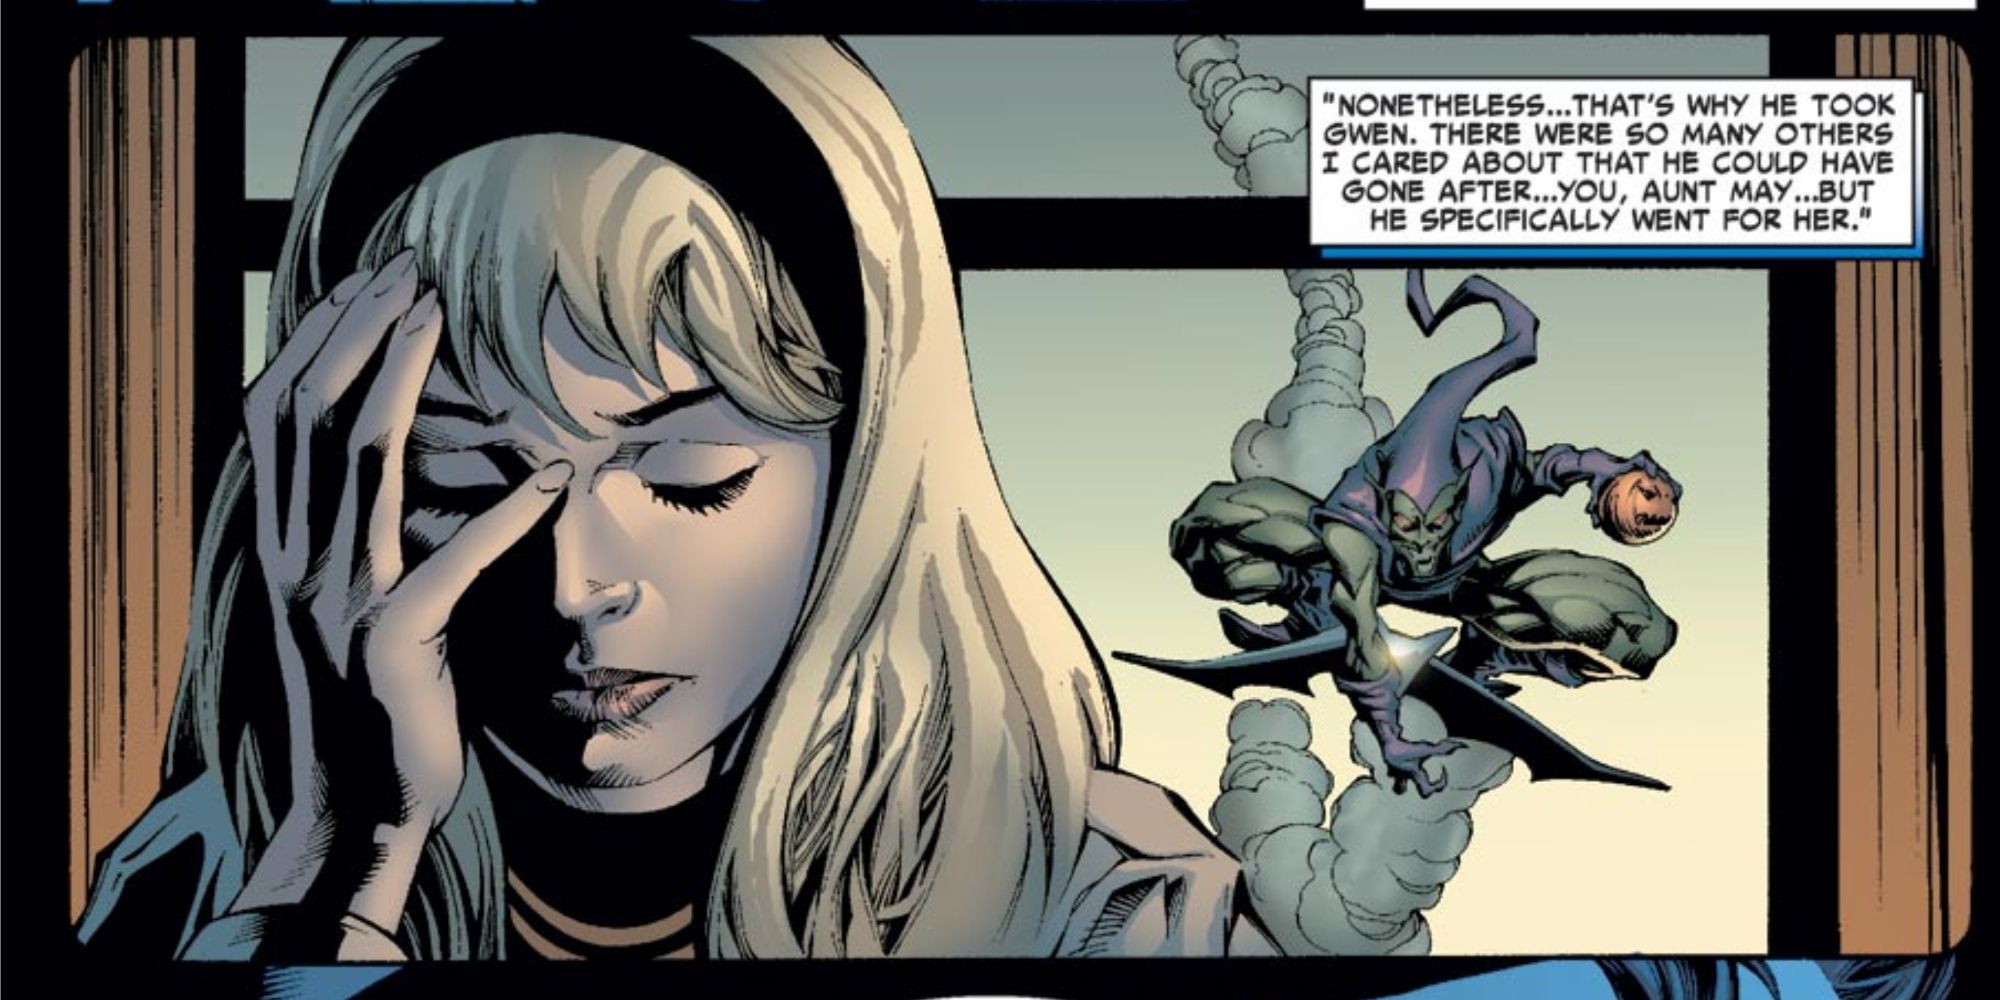 Gwen Stacy and Green Goblin appear in Marvel Comics.